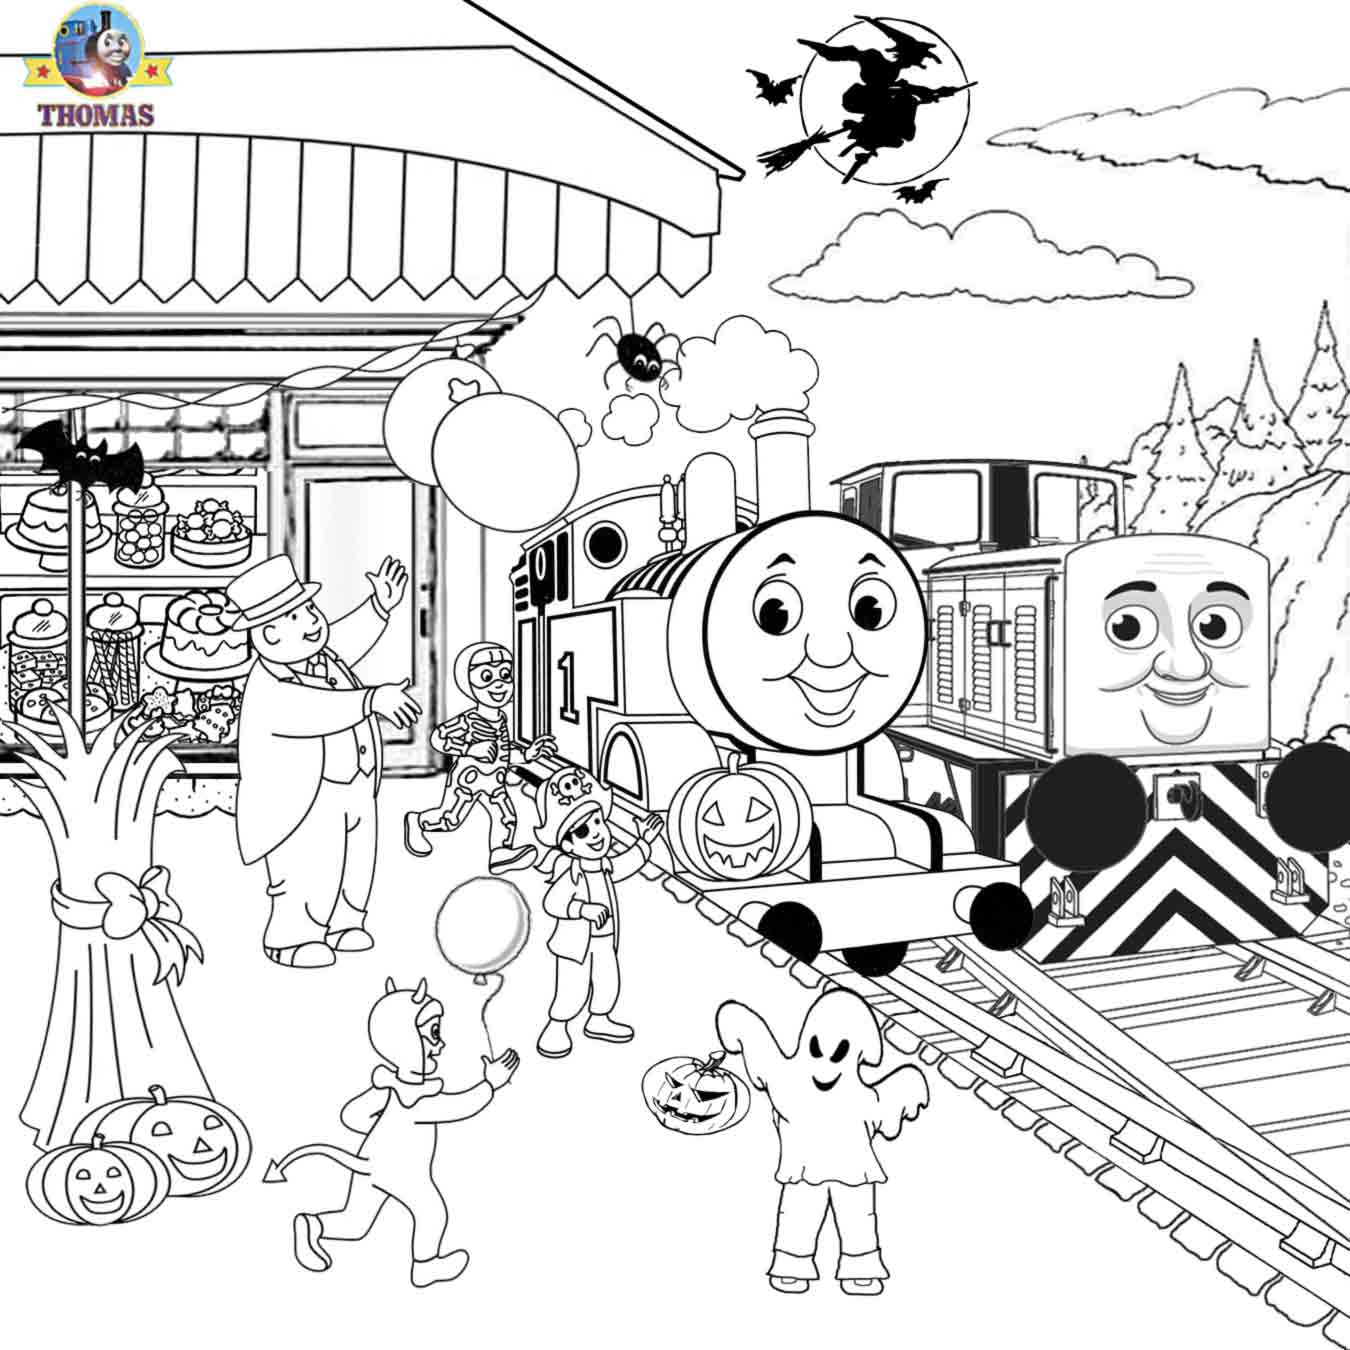 Halloween - Thomas Coloring Pages